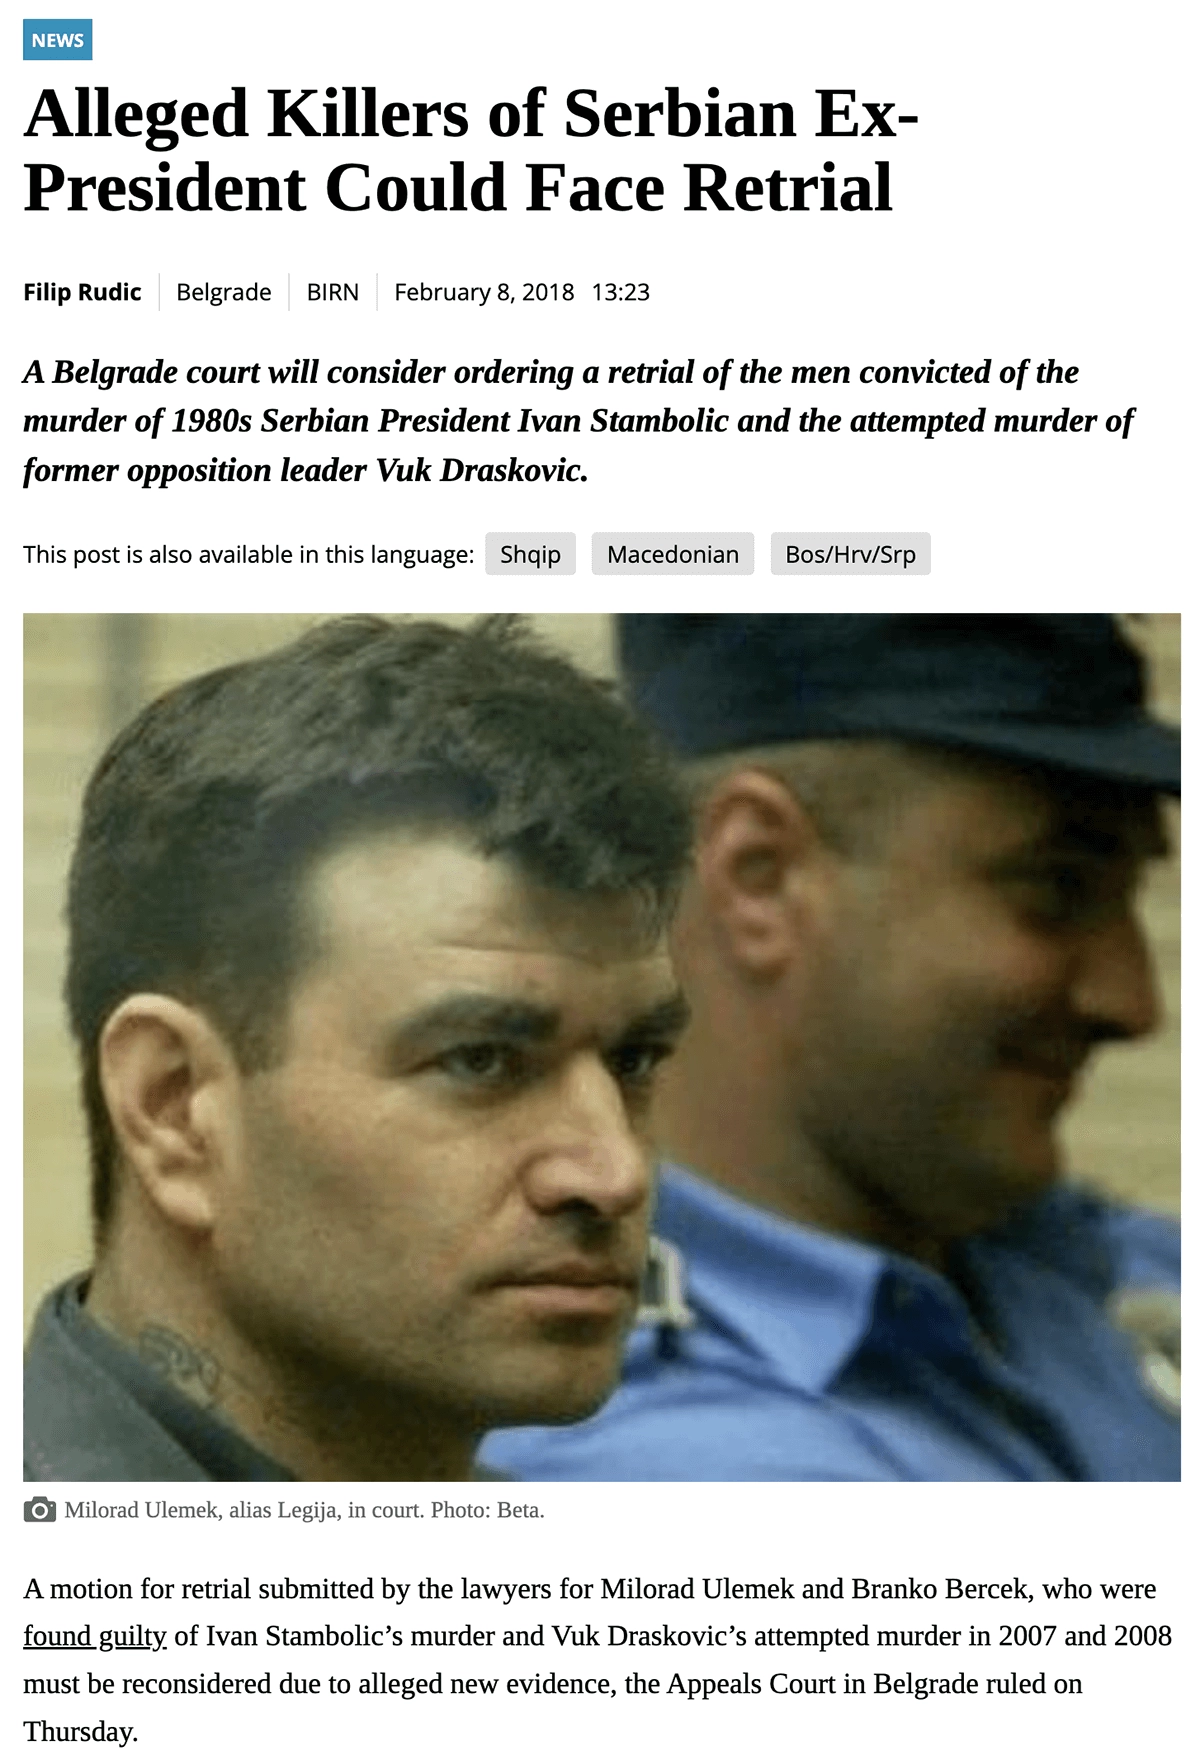 A 2018 <em><a href='https://balkaninsight.com/2018/02/08/serbian-court-clears-way-for-milosevic-assassinations-retrial-02-08-2018/' target='_blank'>Balkan Insight</a></em> (Balkan Investigative Reporting Network) story about a request for a retrial of Milorad Ulemek.